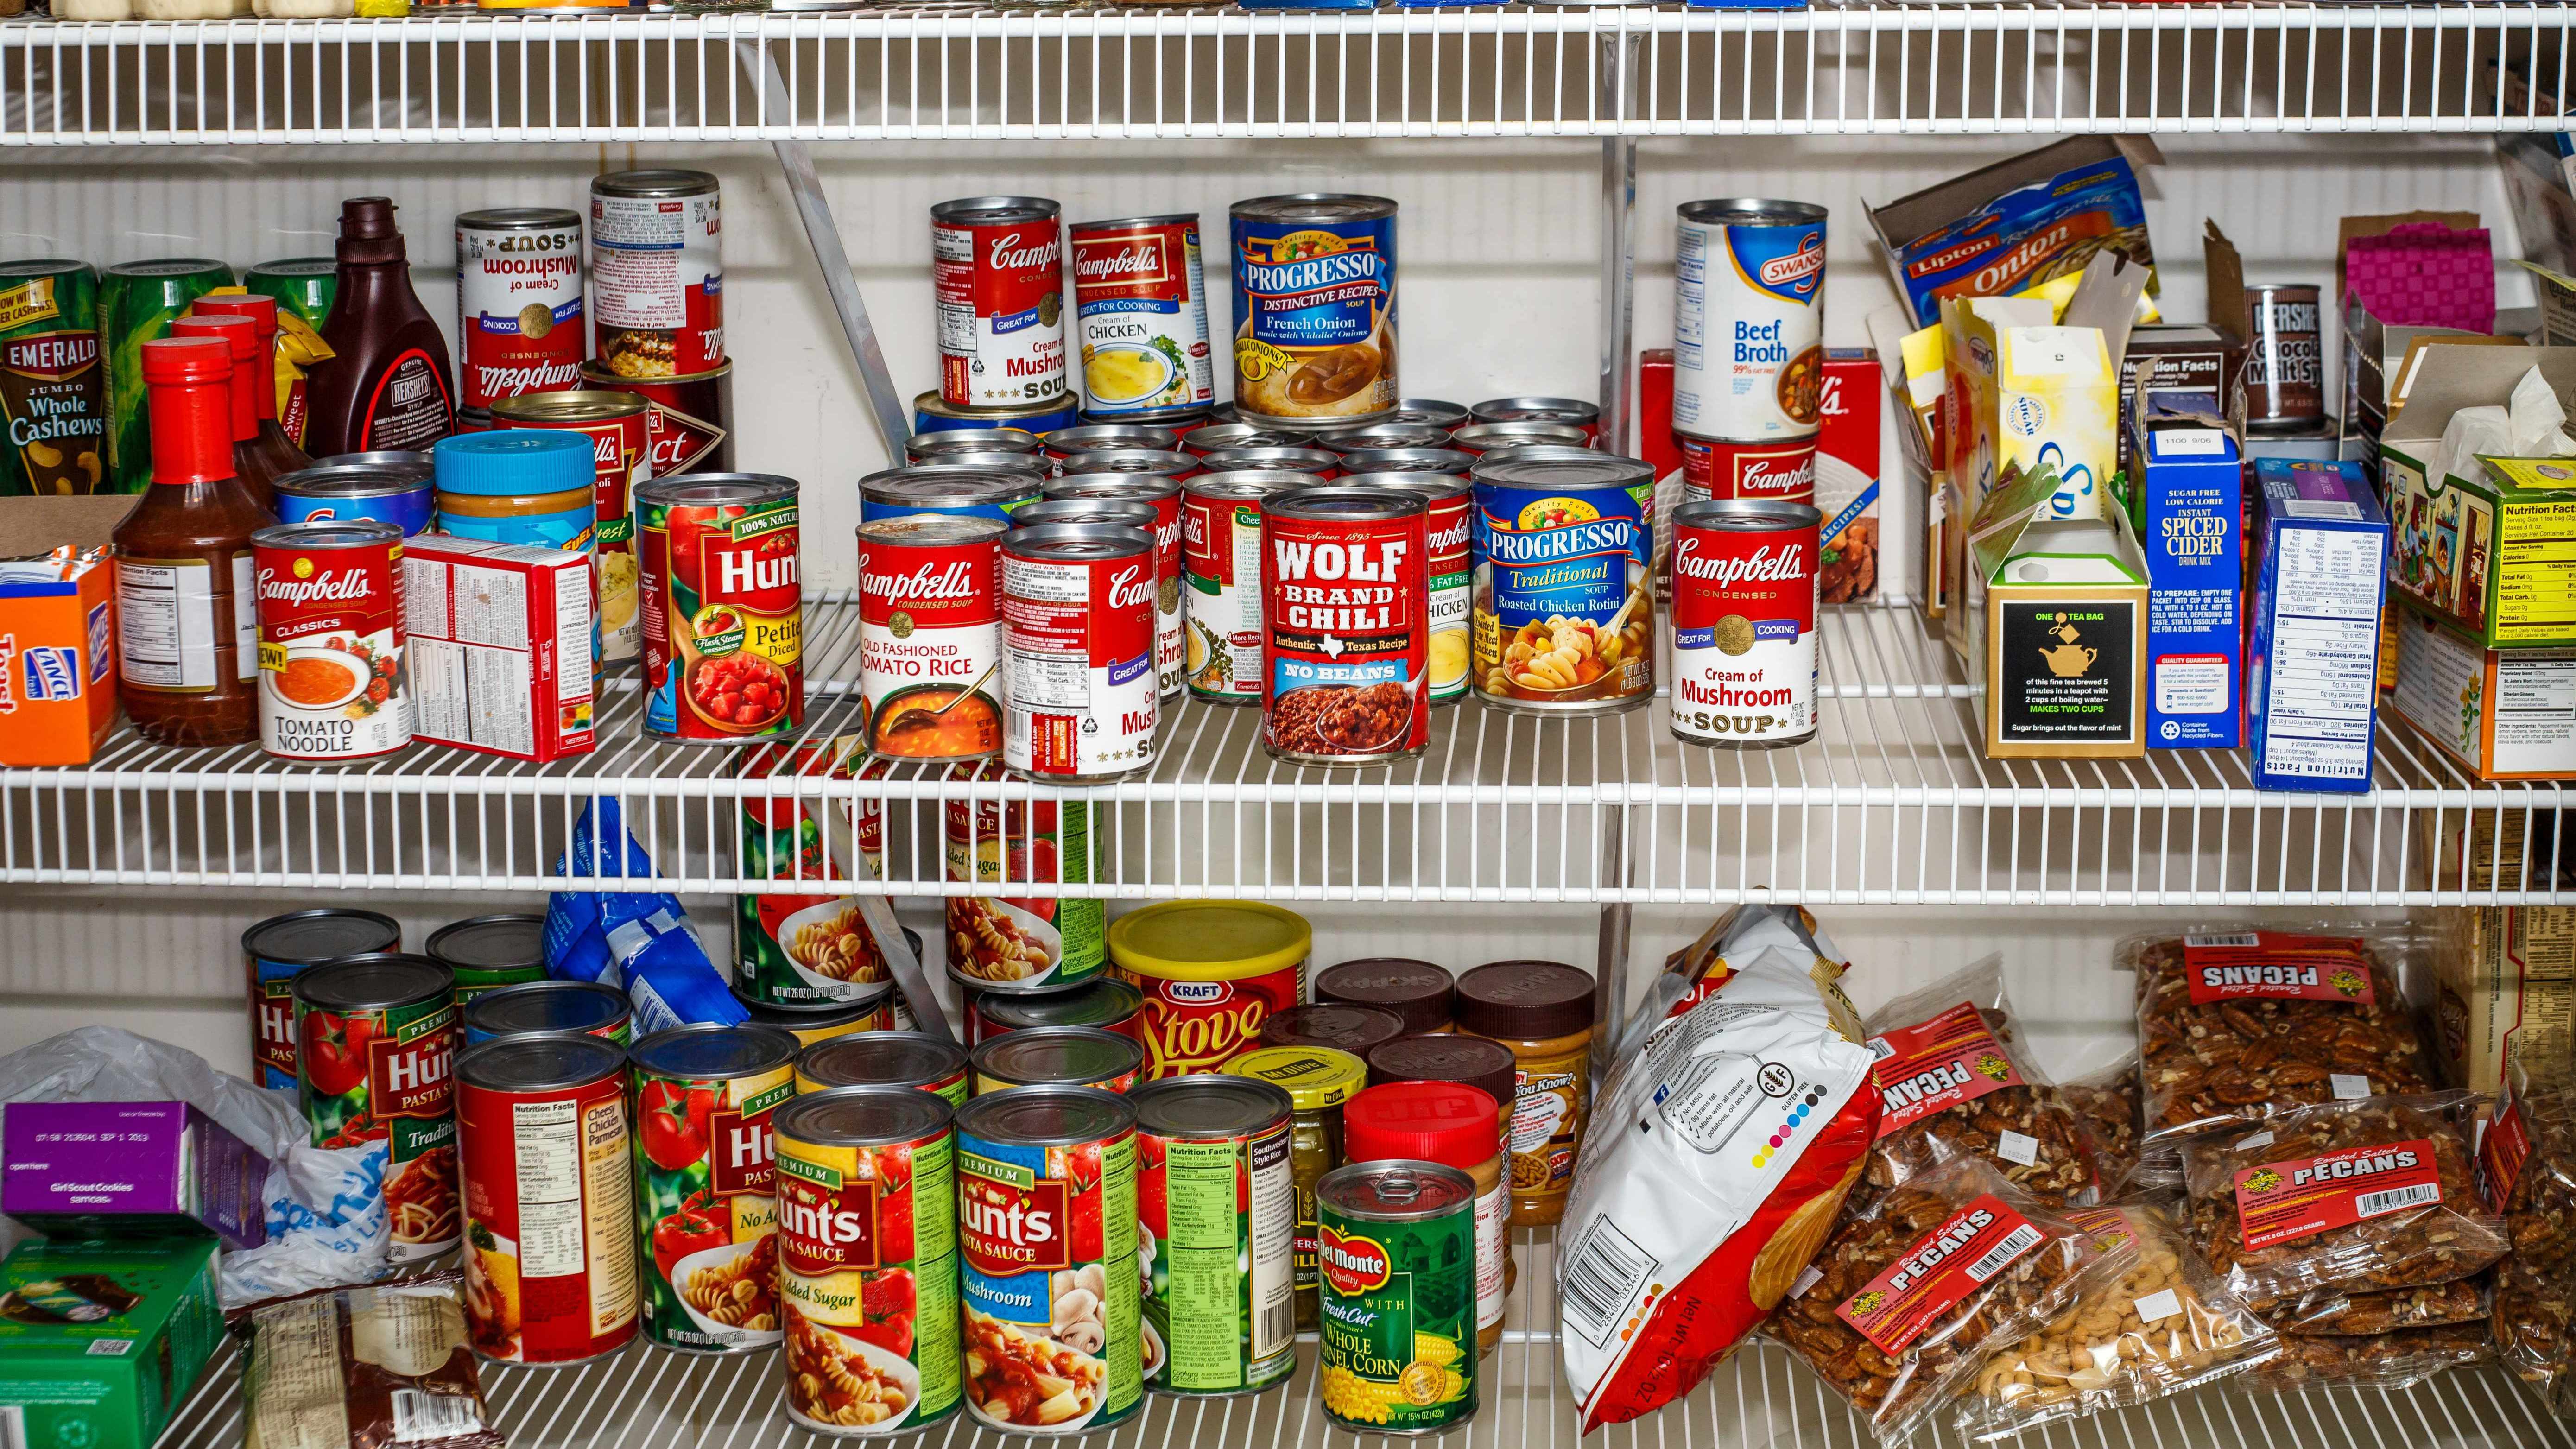 kitchen pantry shelf filled with canned foods and packaged items